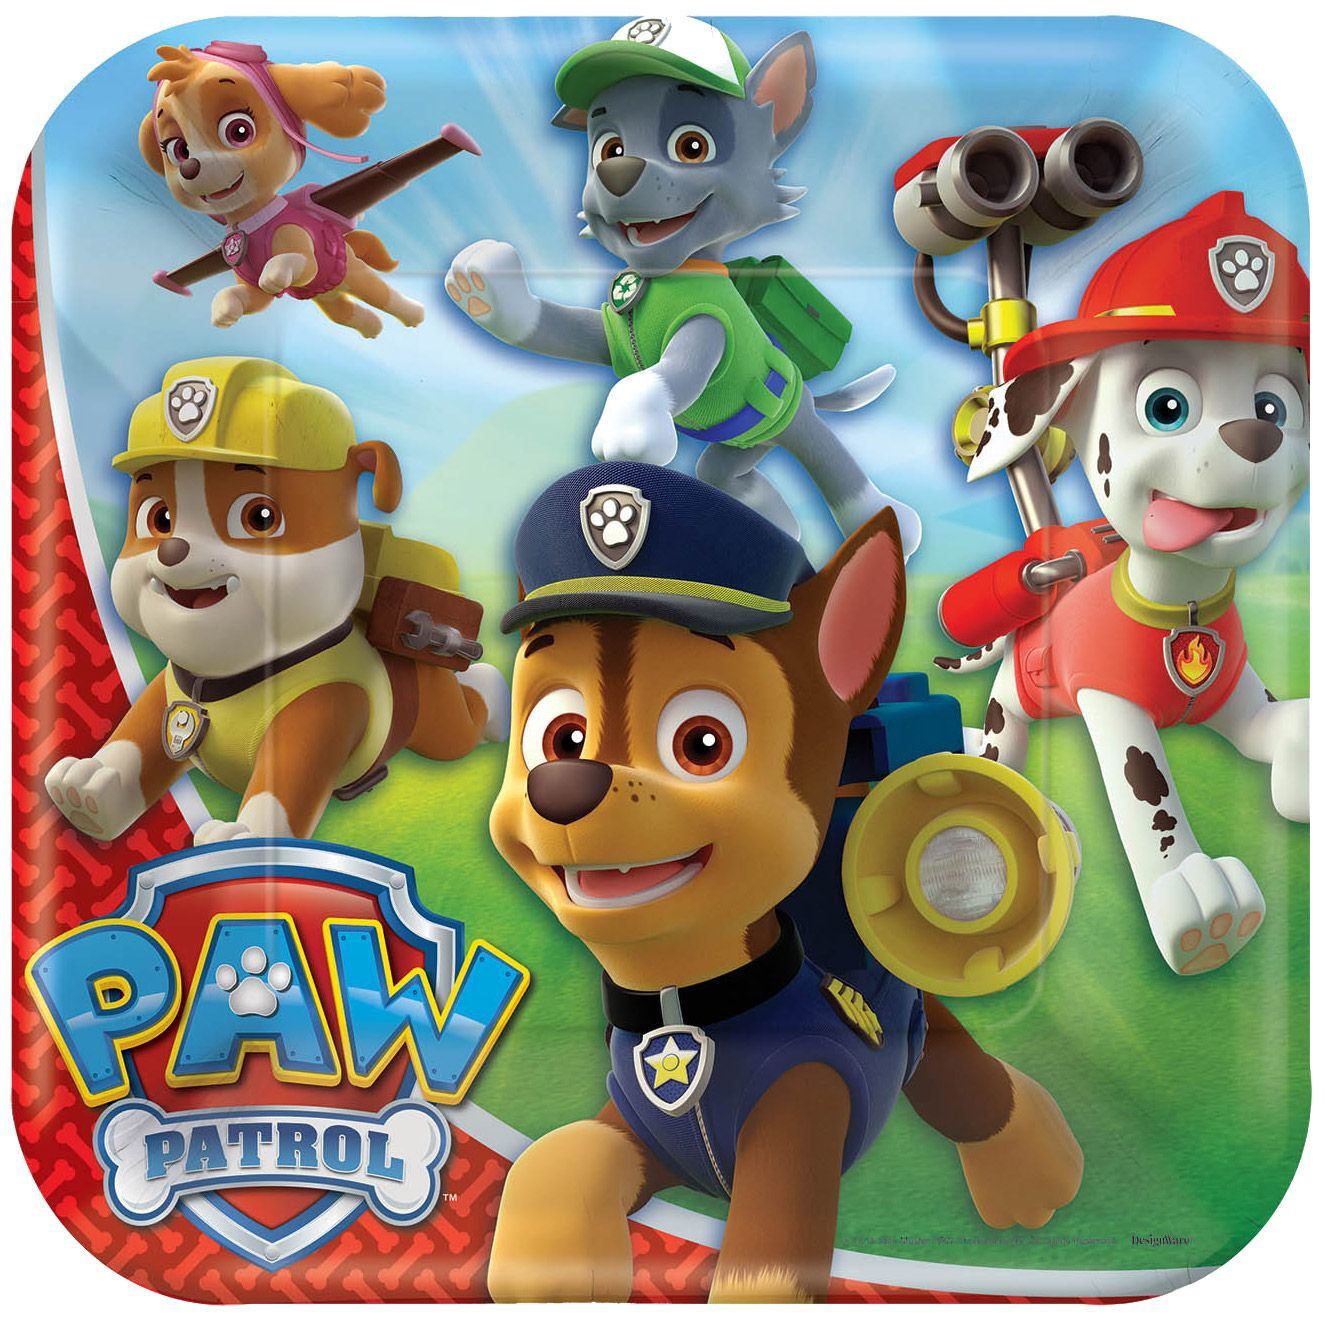 9" PAW Patrol Square Paper Party Plate, 8ct - image 1 of 3